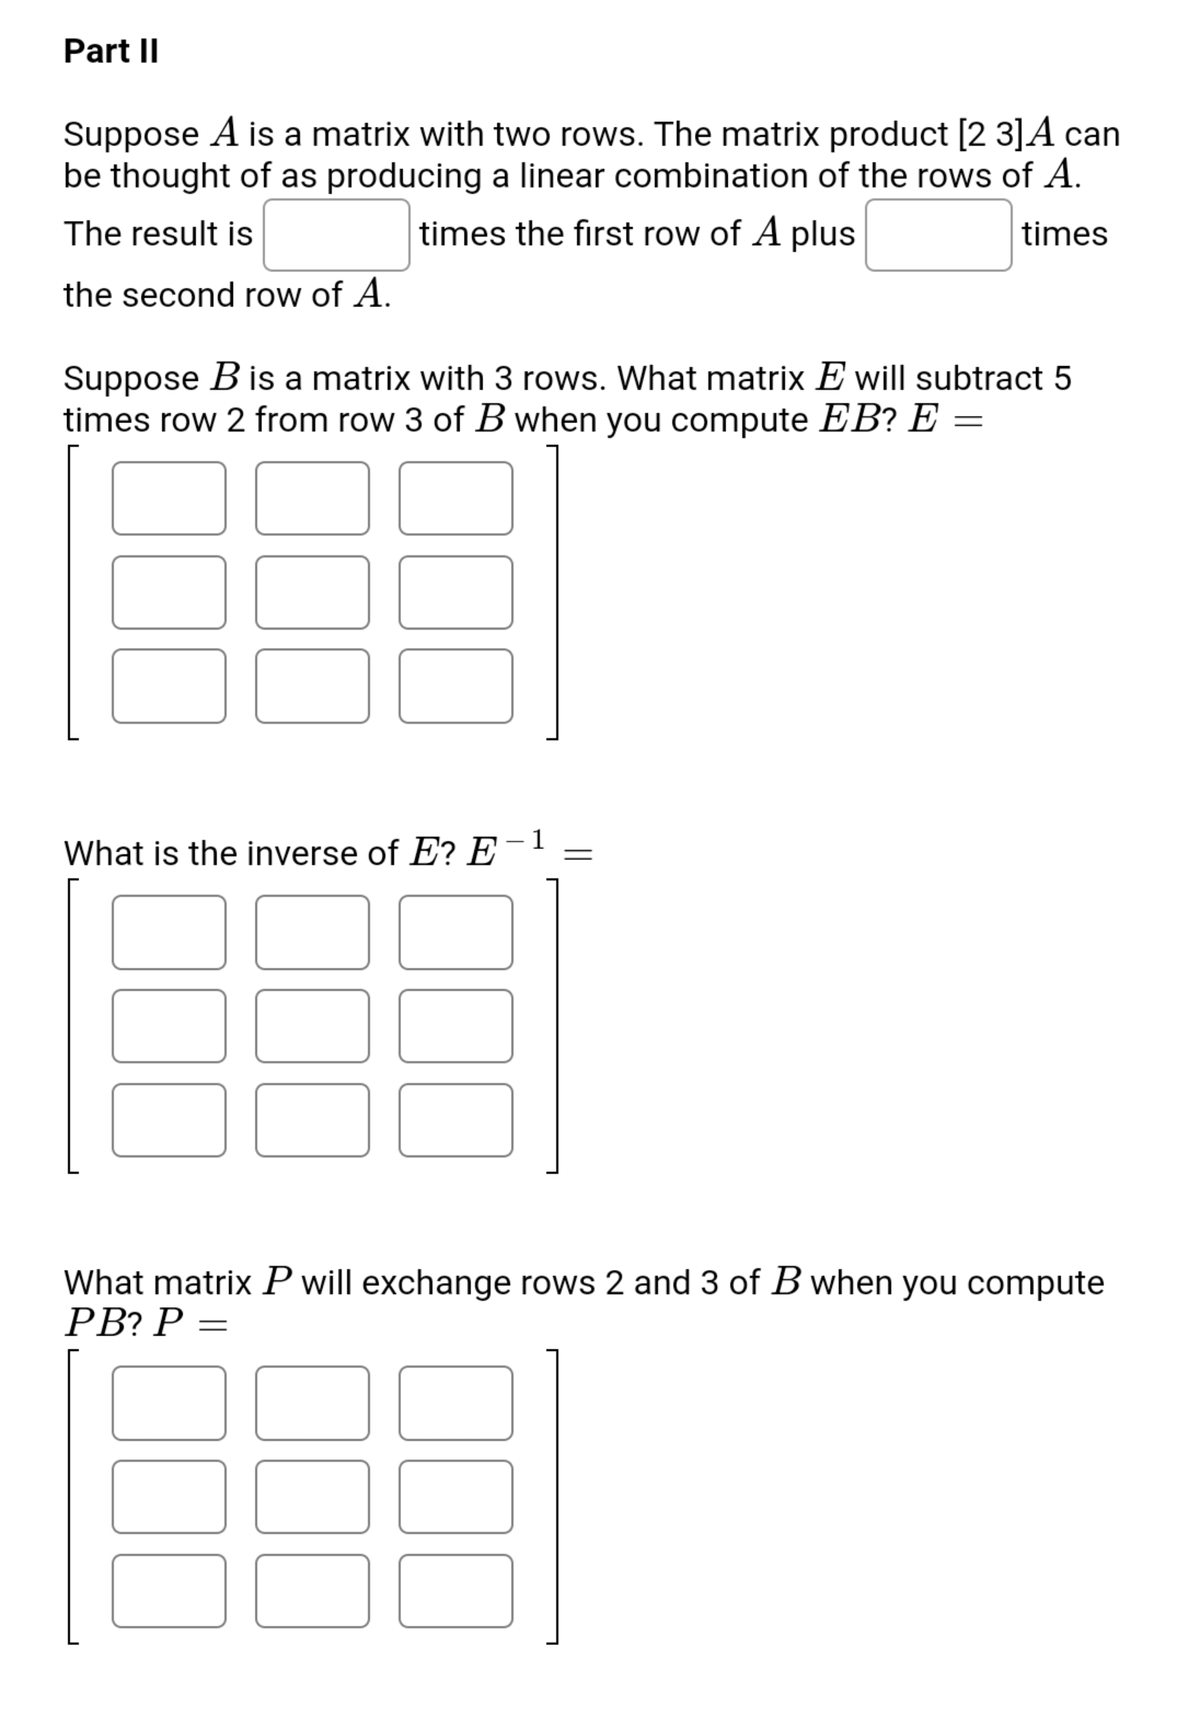 Part II
Suppose A is a matrix with two rows. The matrix product [2 3]A can
be thought of as producing a linear combination of the rows of A.
The result is
times the first row of A plus
times
the second row of A.
Suppose B is a matrix with 3 rows. What matrix E will subtract 5
times row 2 from row 3 of B when you compute EB? E =
1
What is the inverse of E? E
What matrix P will exchange rows 2 and 3 of B when you compute
PB? P =
